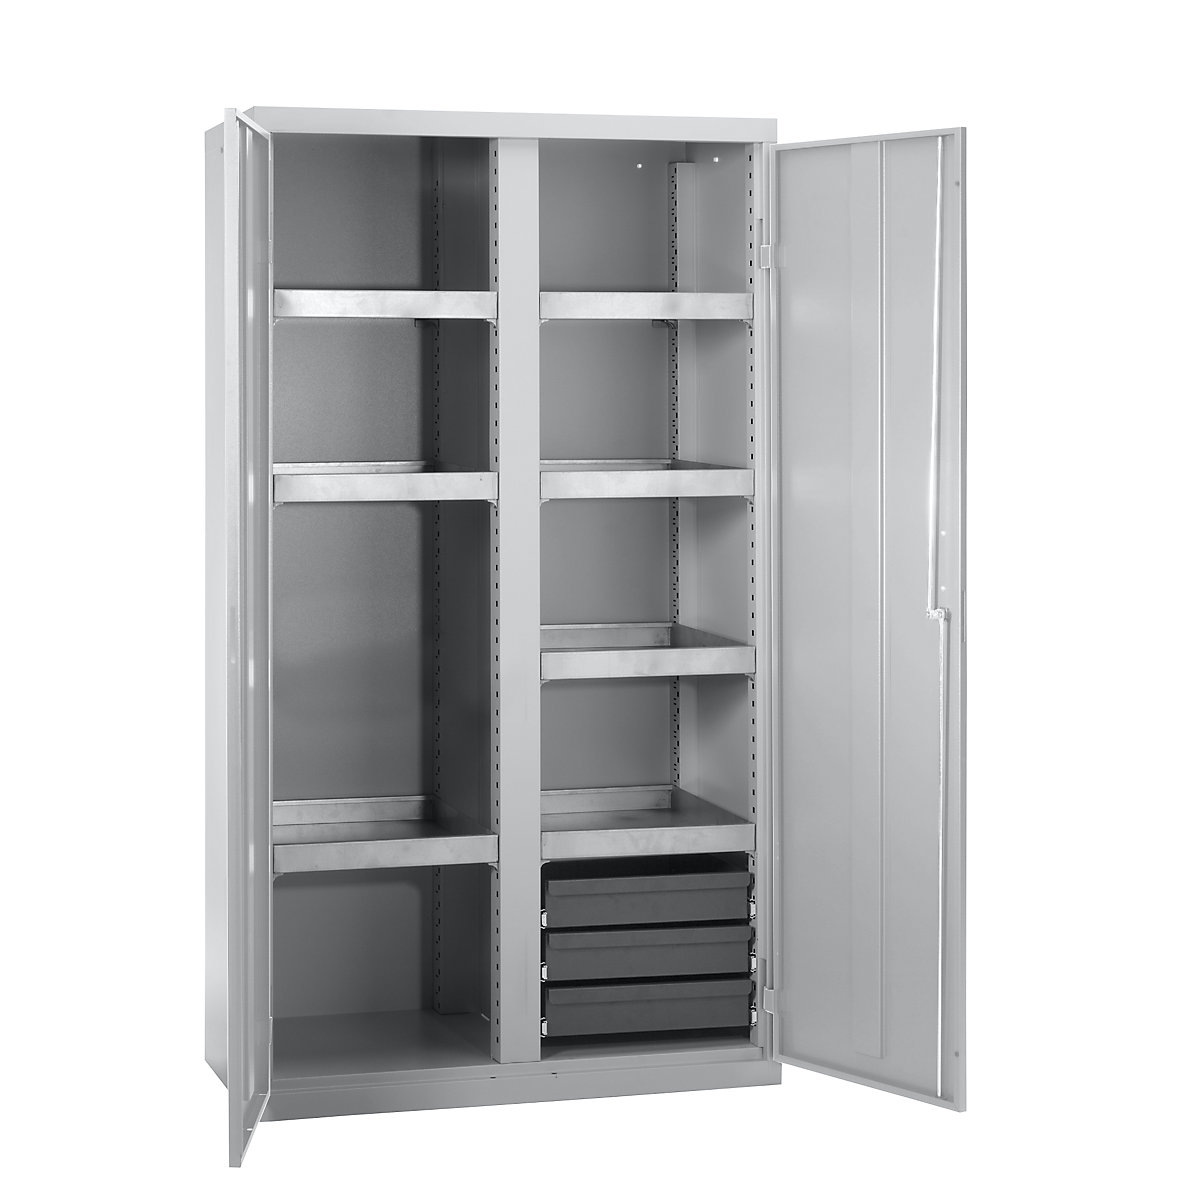 Environmental cupboard without door perforations, HxWxD 1800 x 1000 x 500 mm, 7 tray shelves, light grey / light grey-5